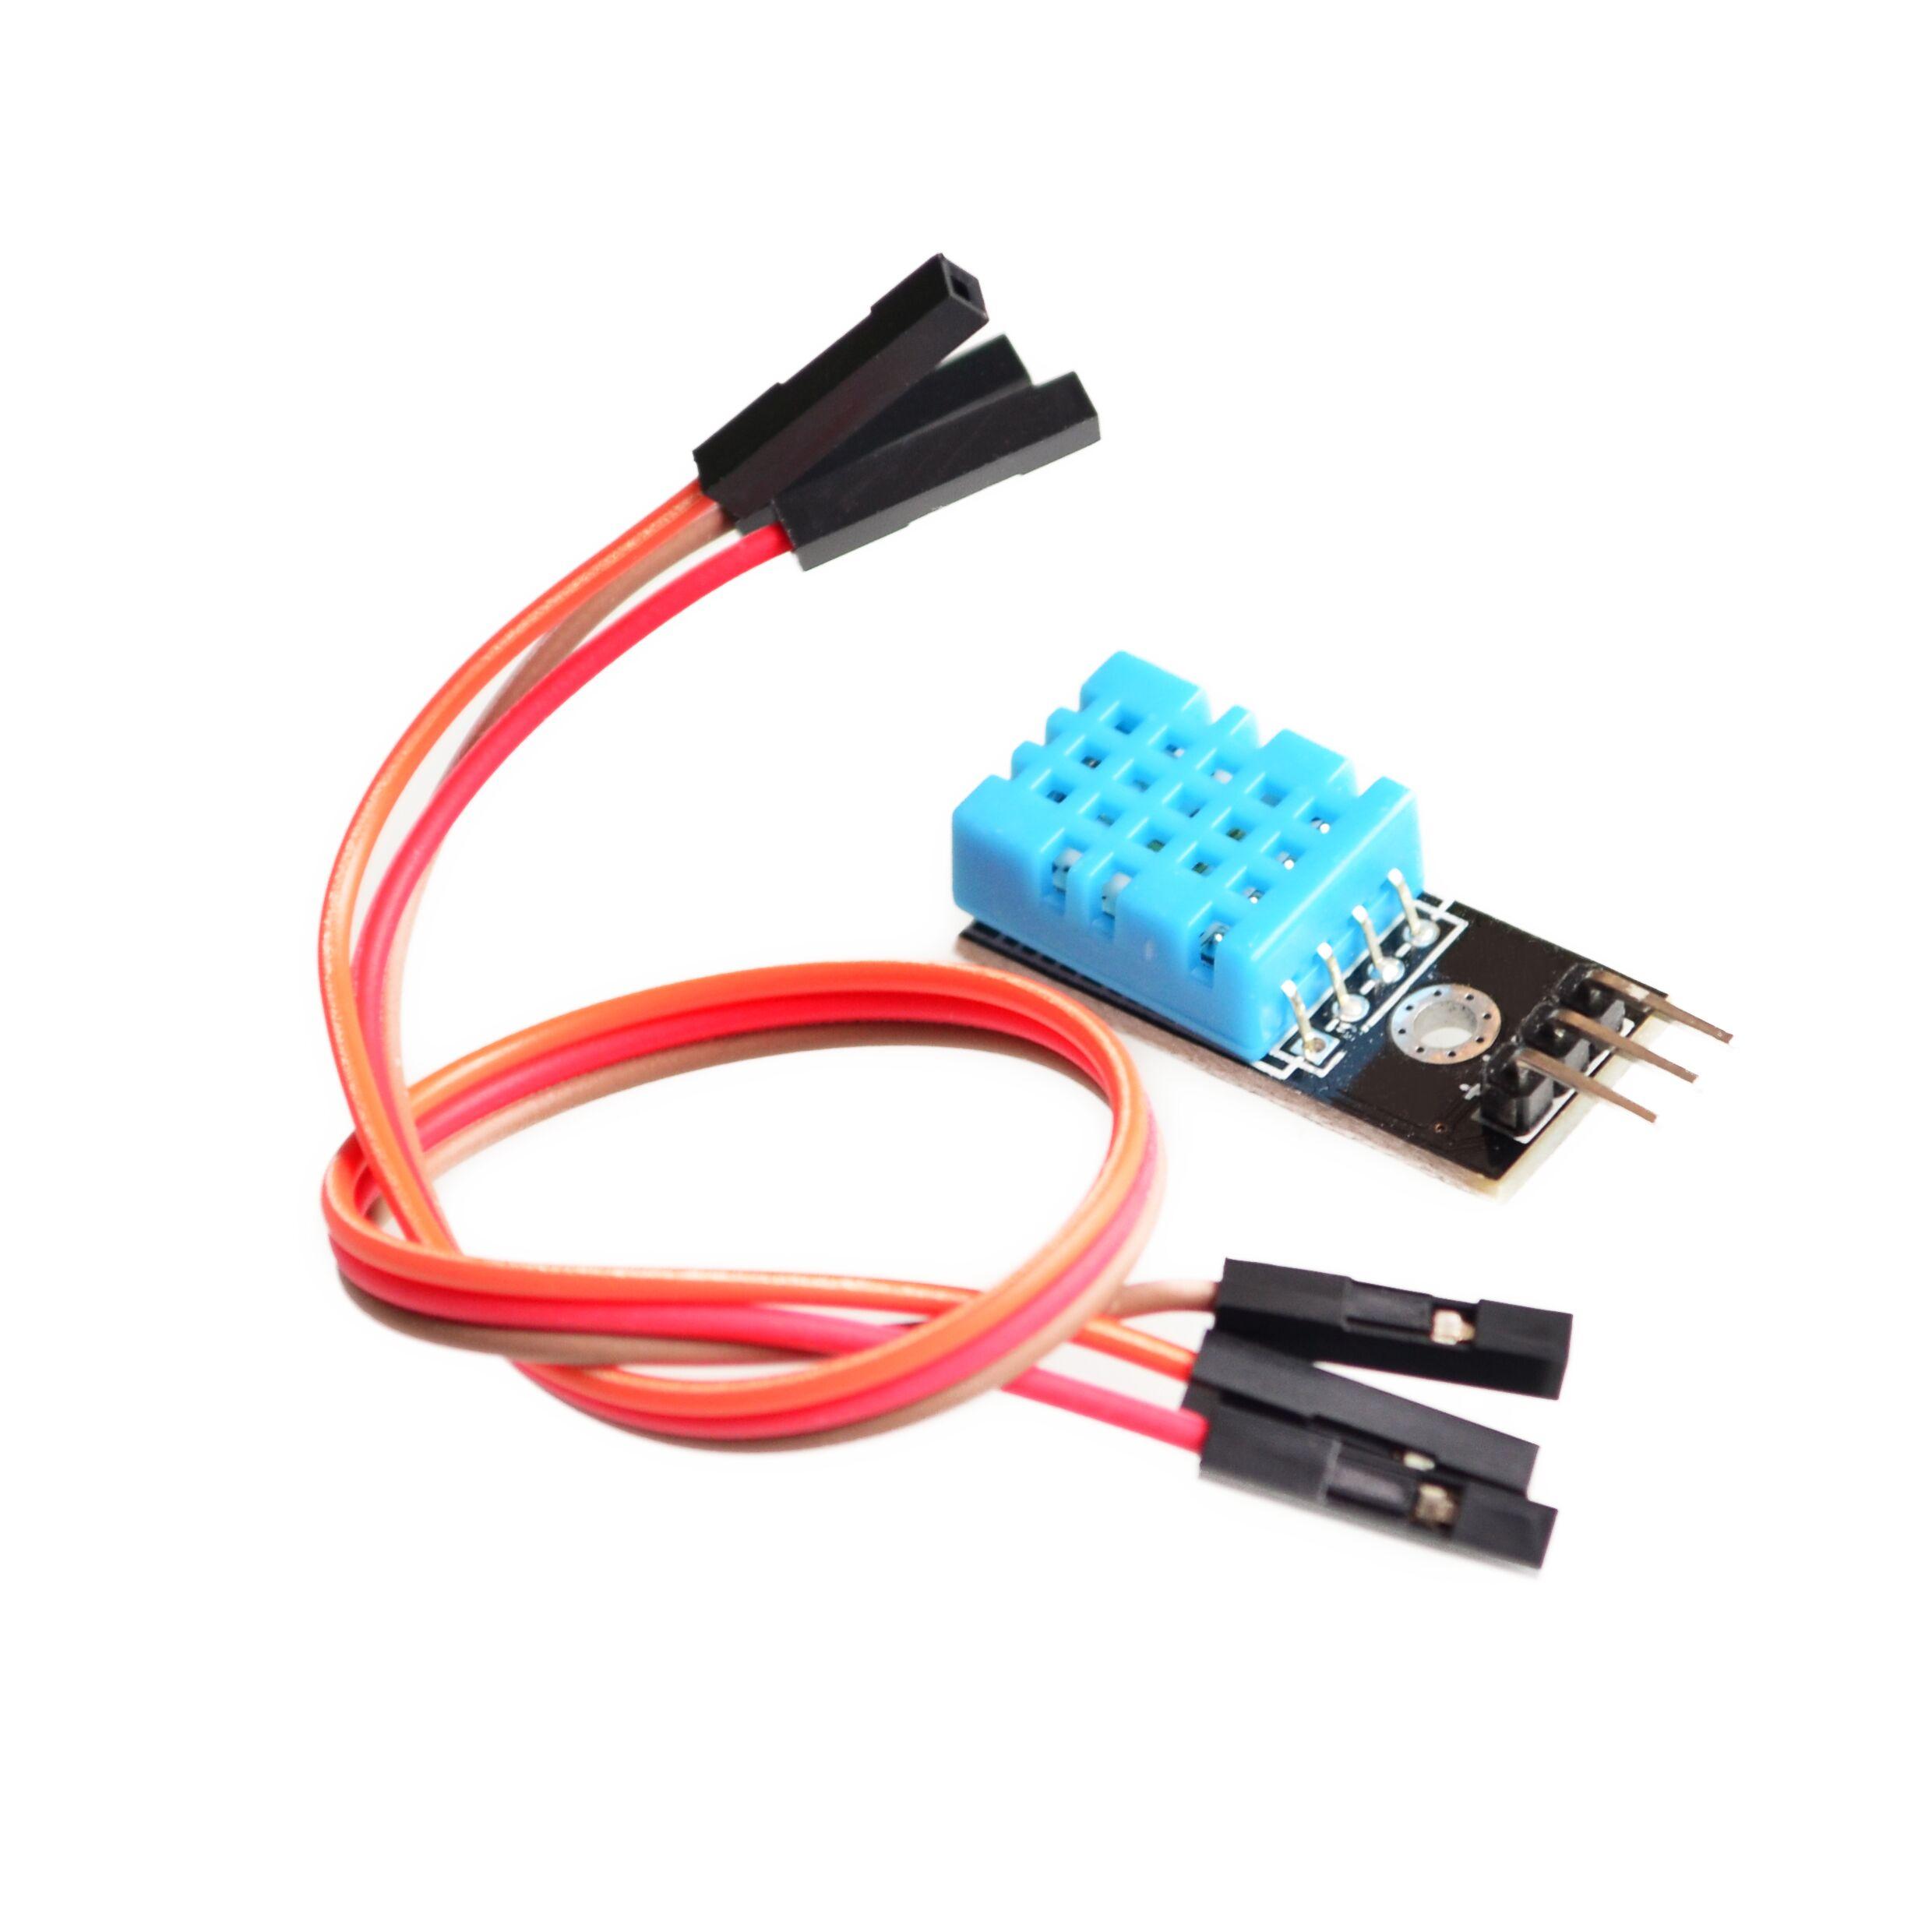 DHT11 Temperature and Relative Humidity Sensor Module With Cable